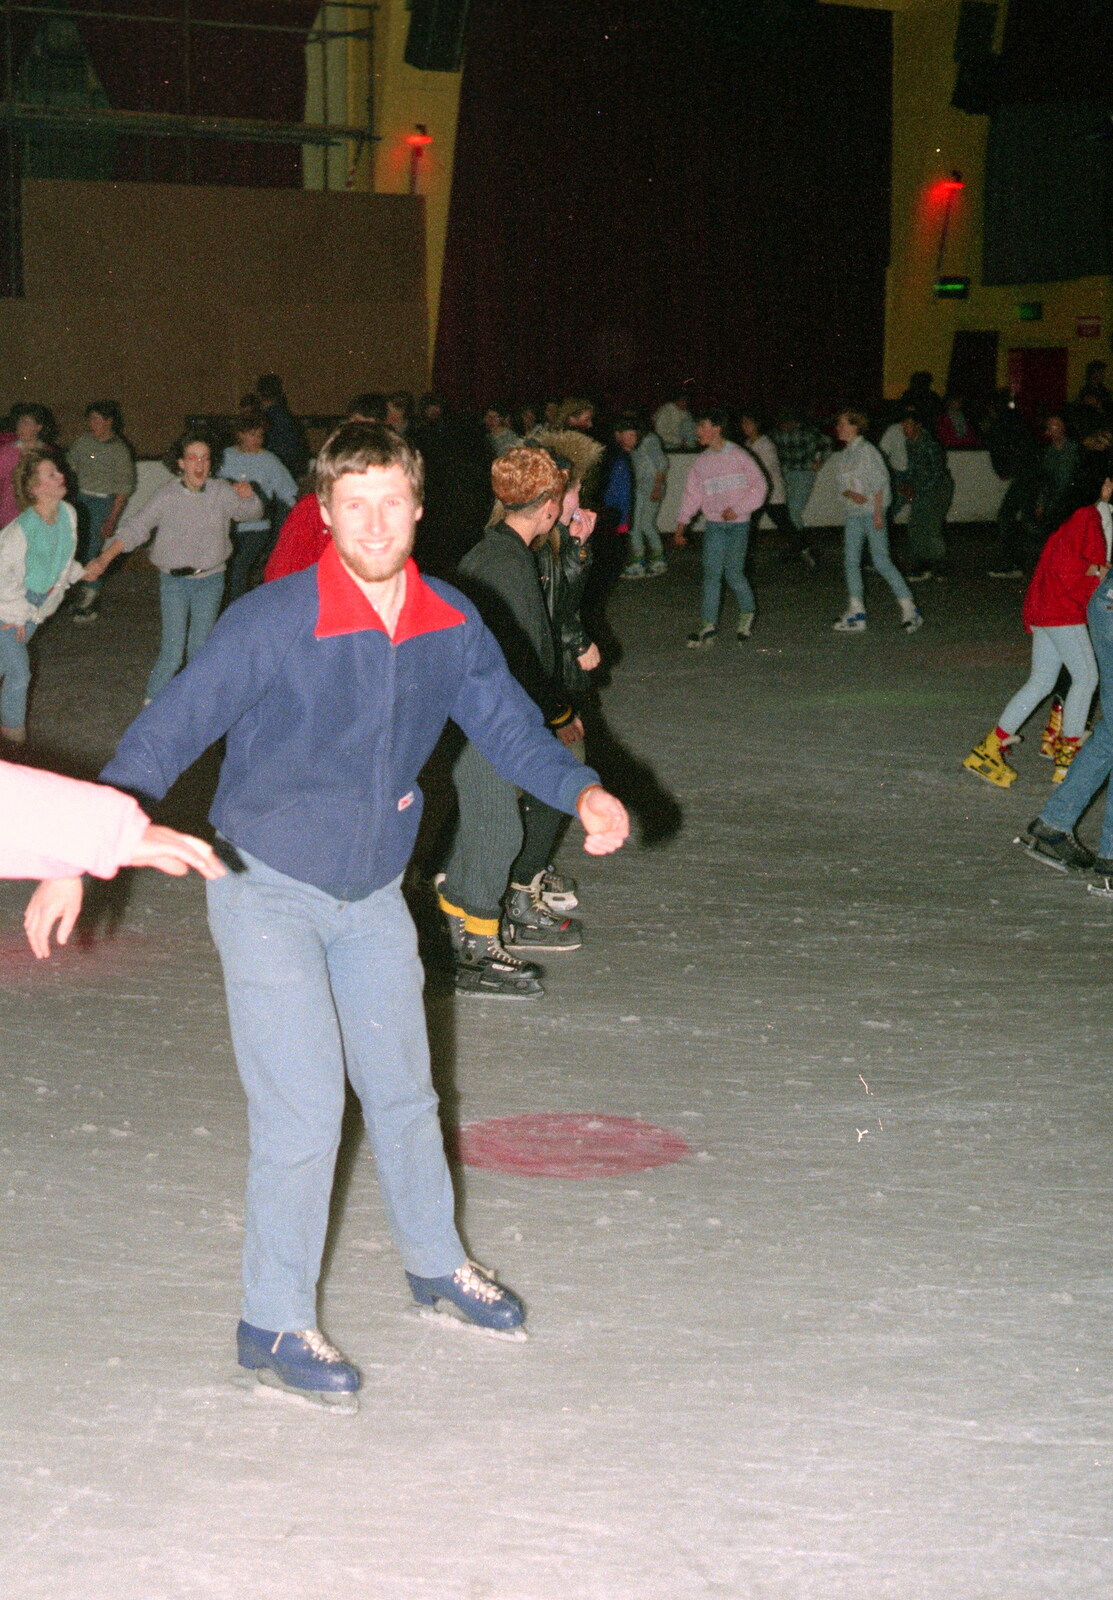 Unsteady ice skating from A CB Reunion and a Trip to the Beach, Barton on Sea, Hampshire - 4th April 1986